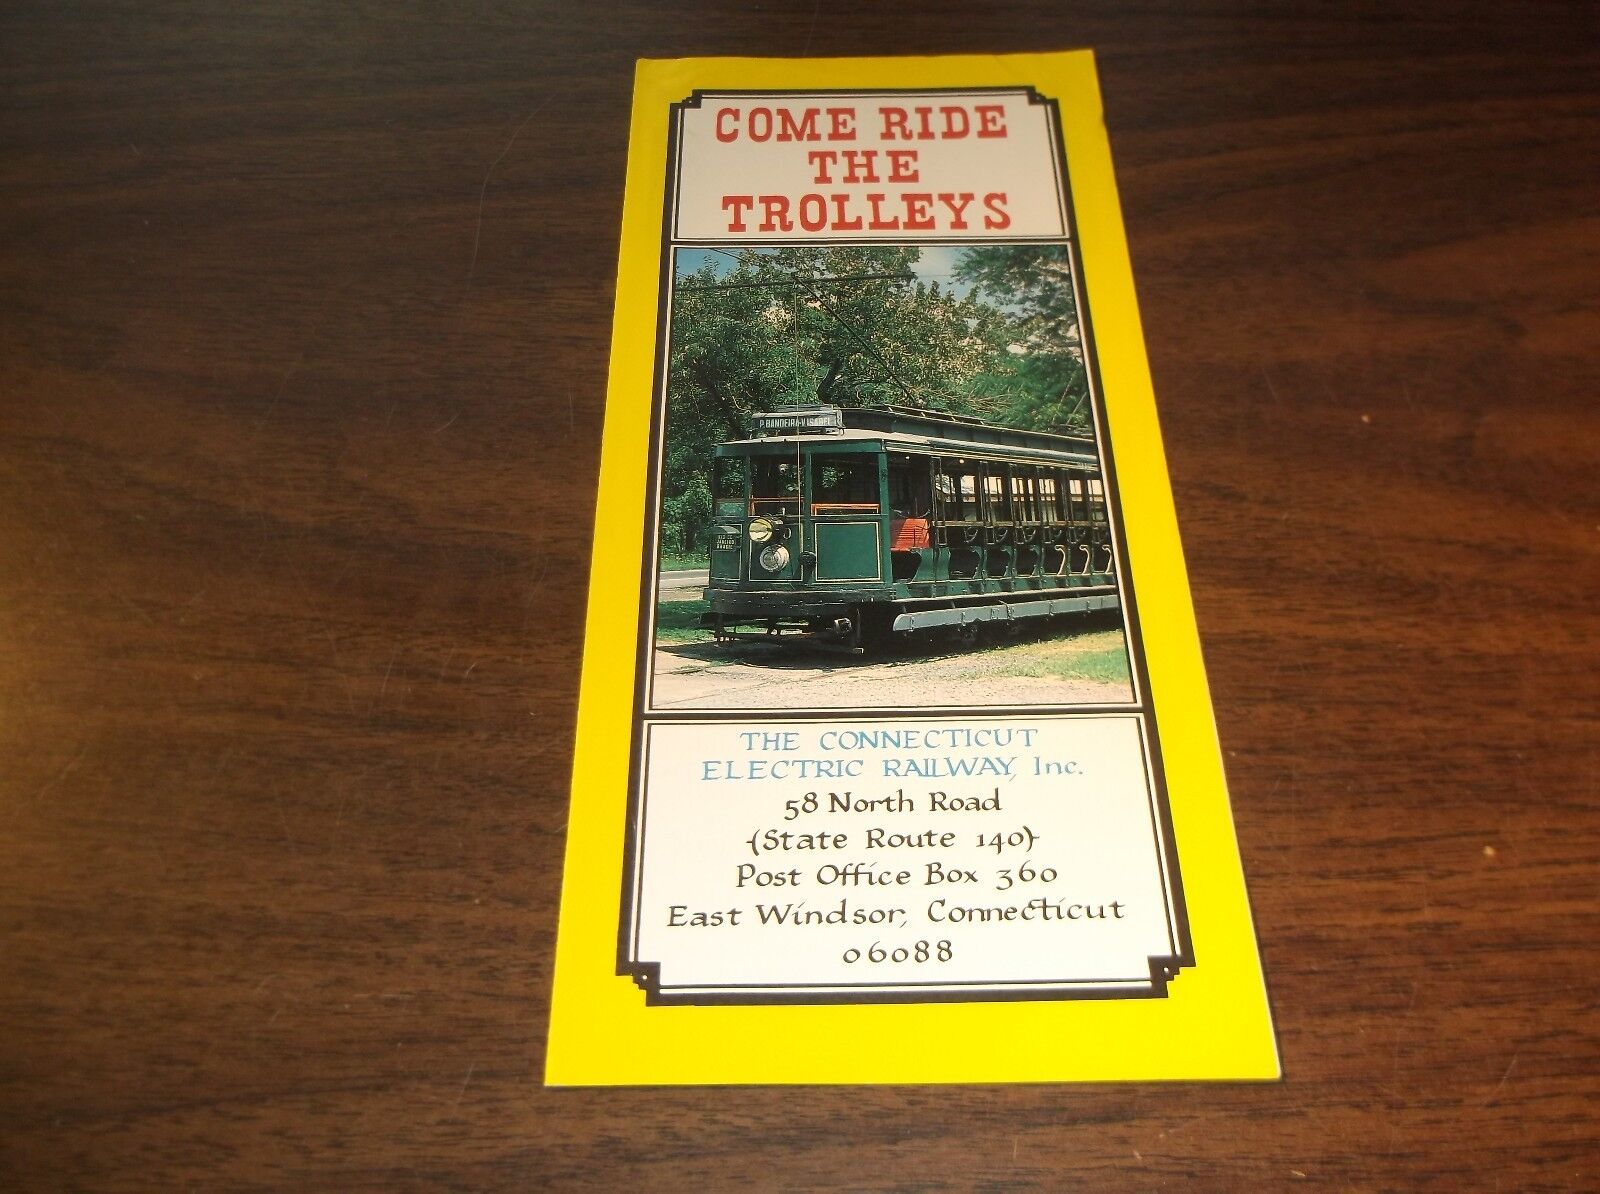 CONNECTICUT ELECTRIC RAILWAY TROLLEY MUSEUM UNDATED TIMETABLE AND BROCHURE